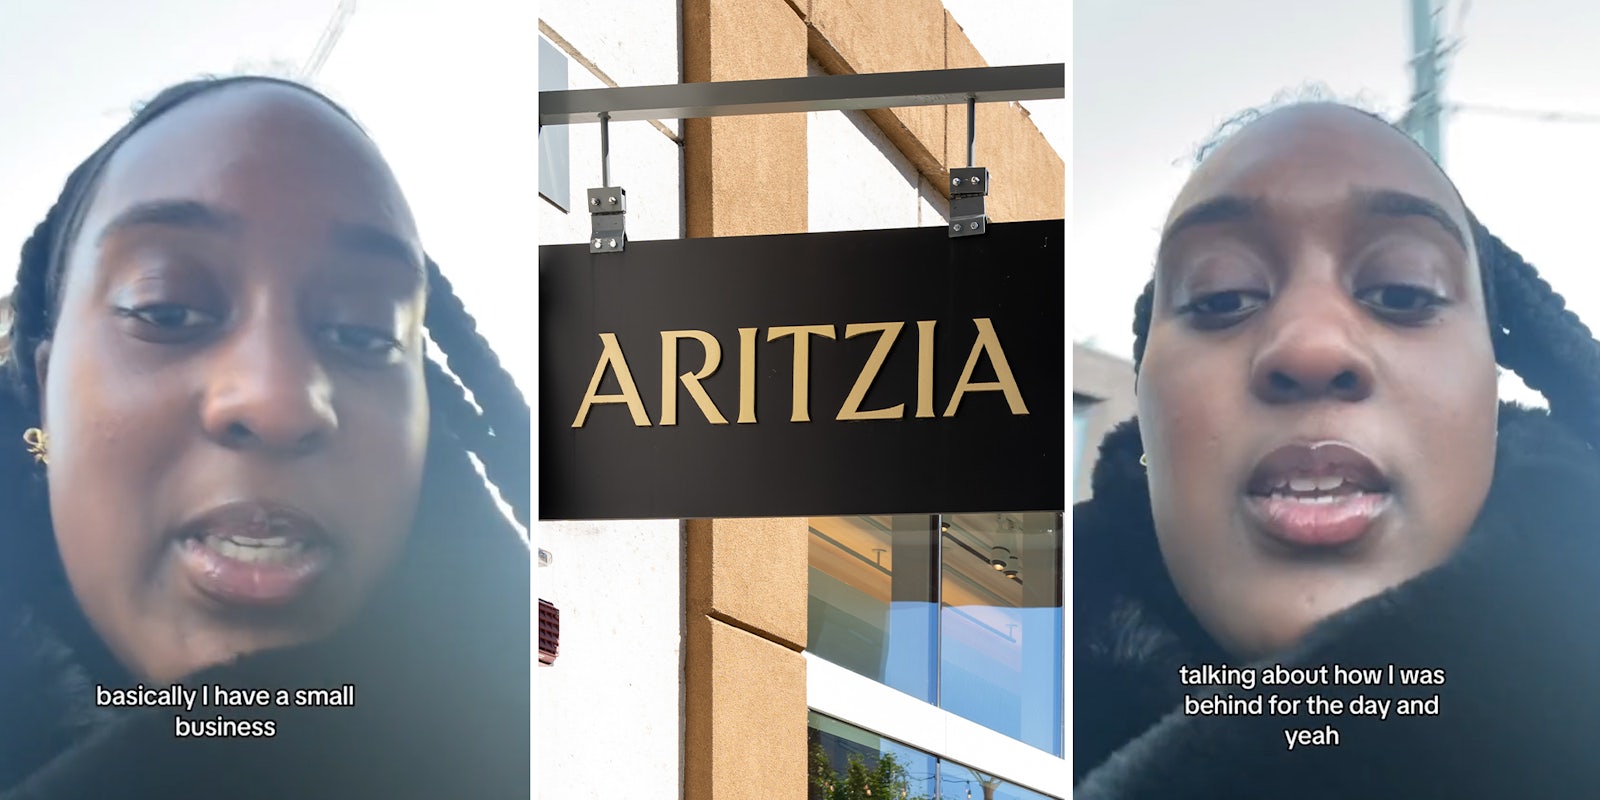 Aritzia worker gets fired after promoting her business at work